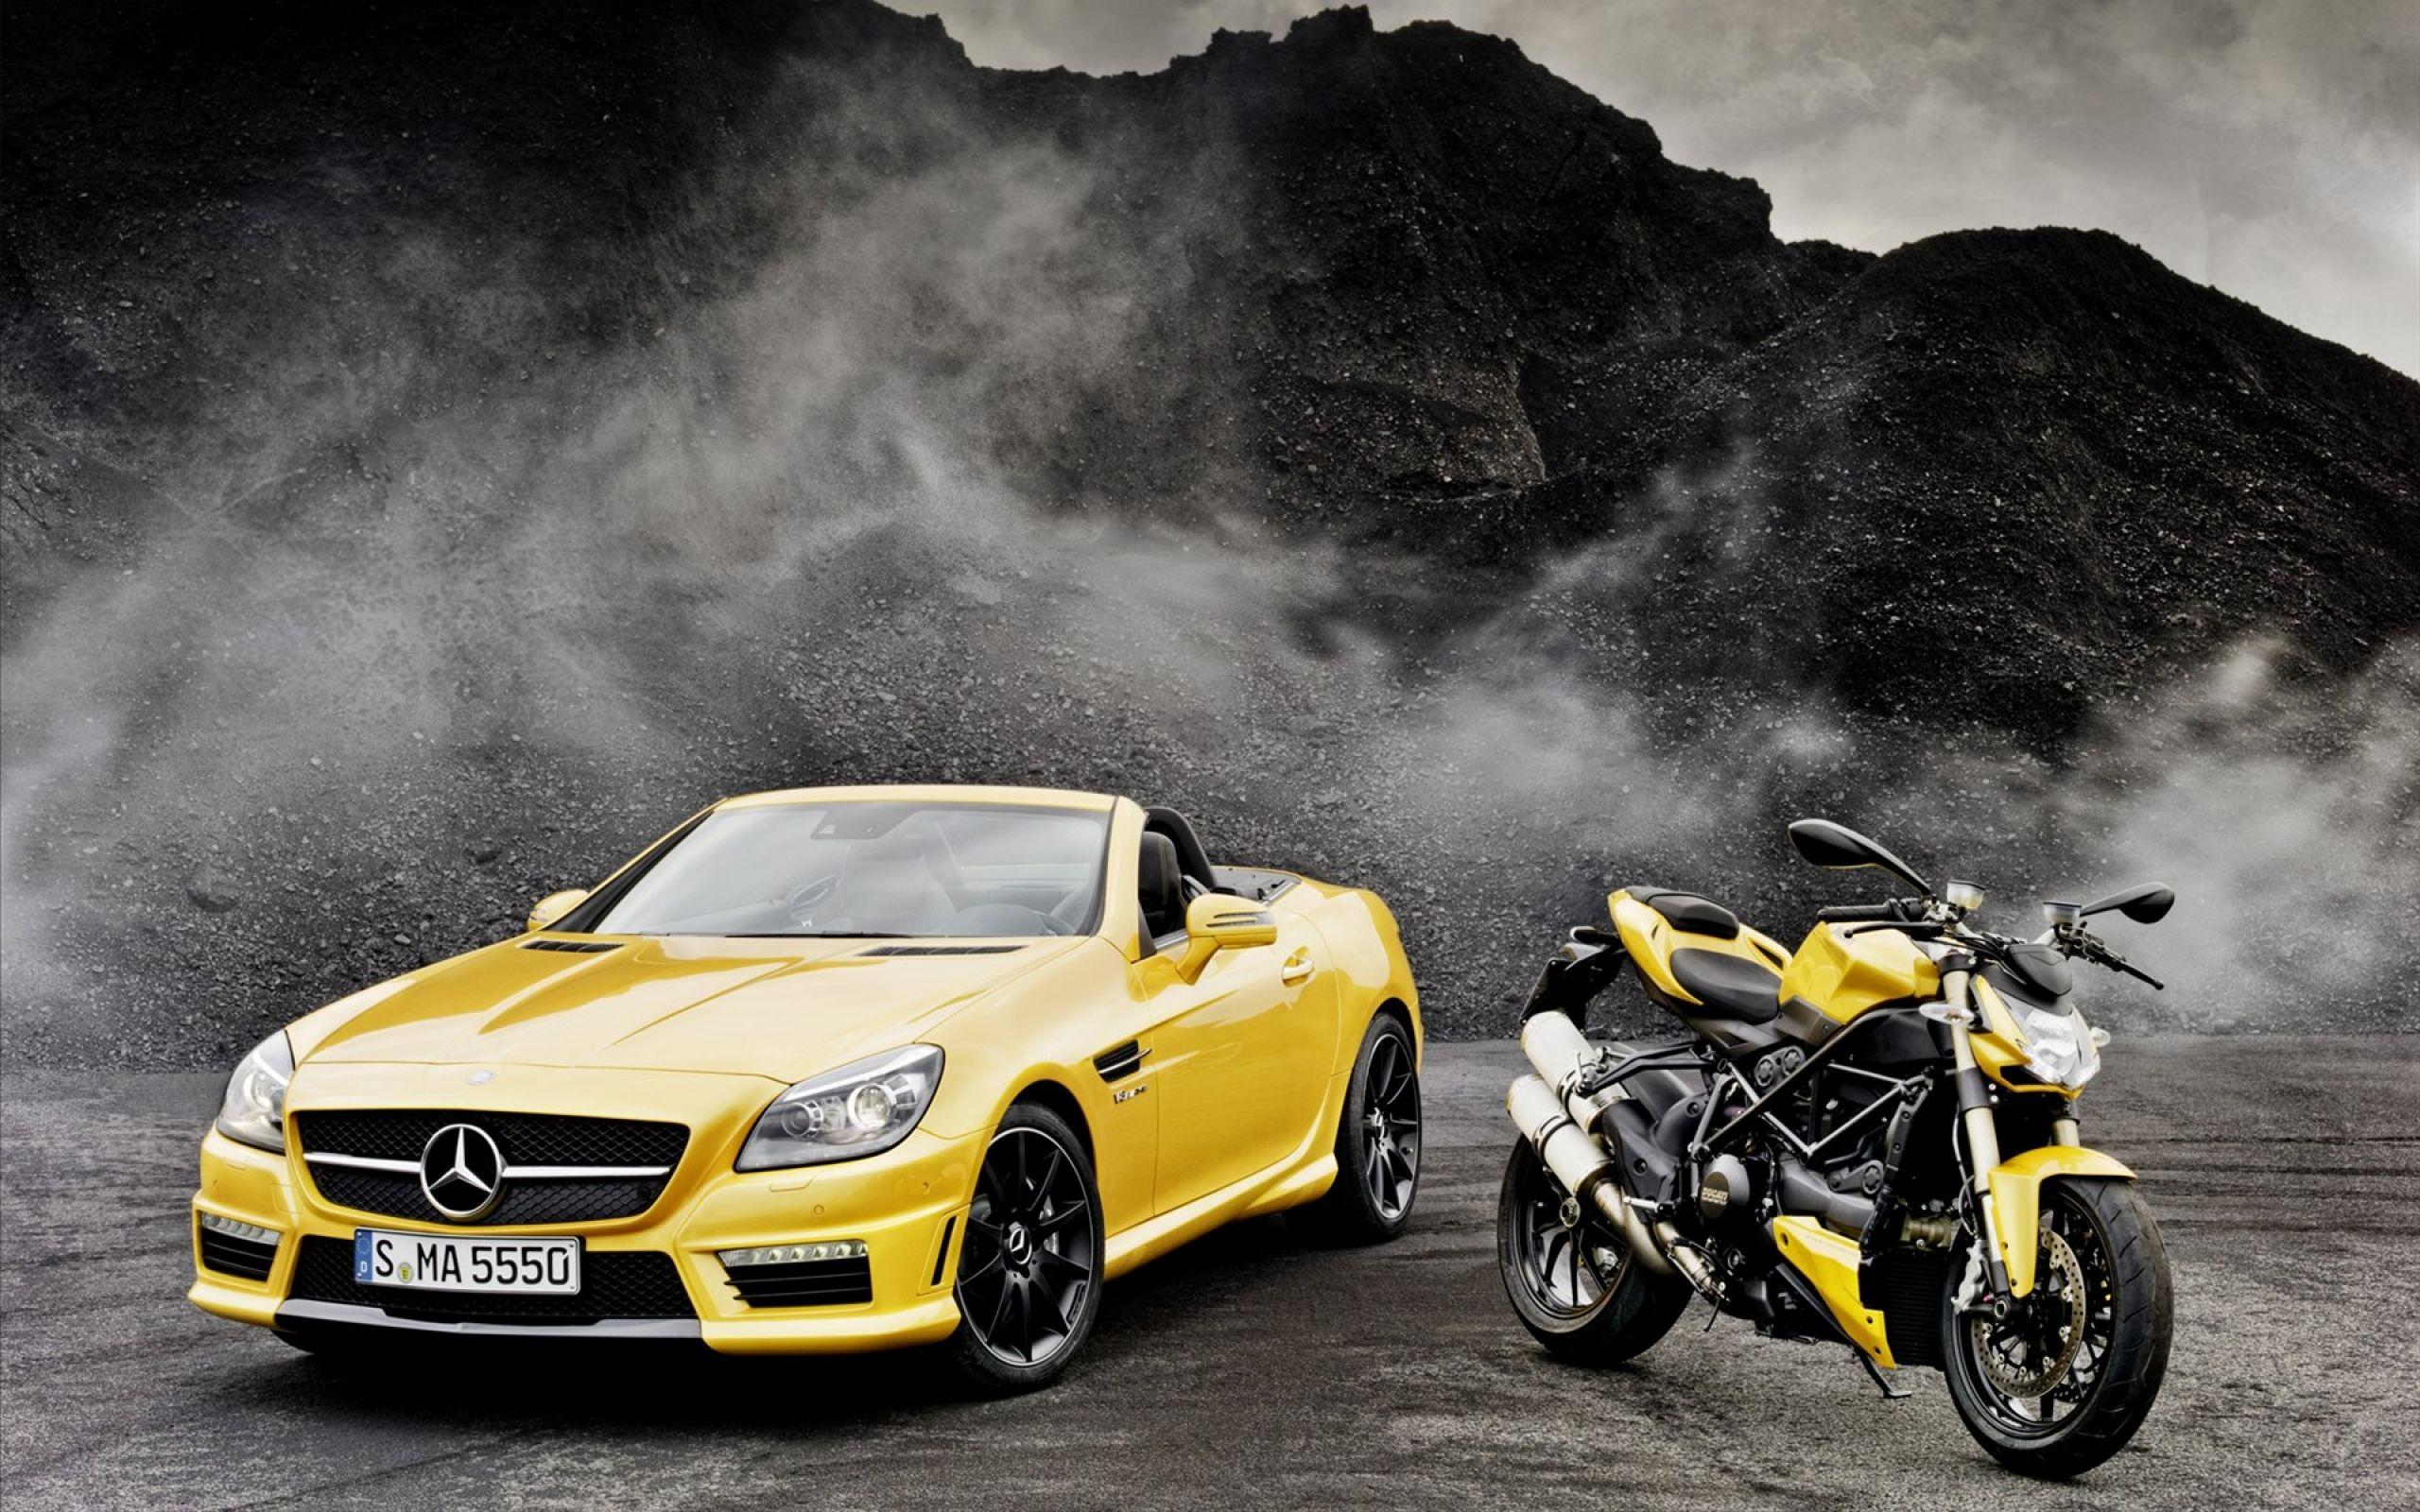 Hd Wallpapers Of Cars And Bikes Free Download